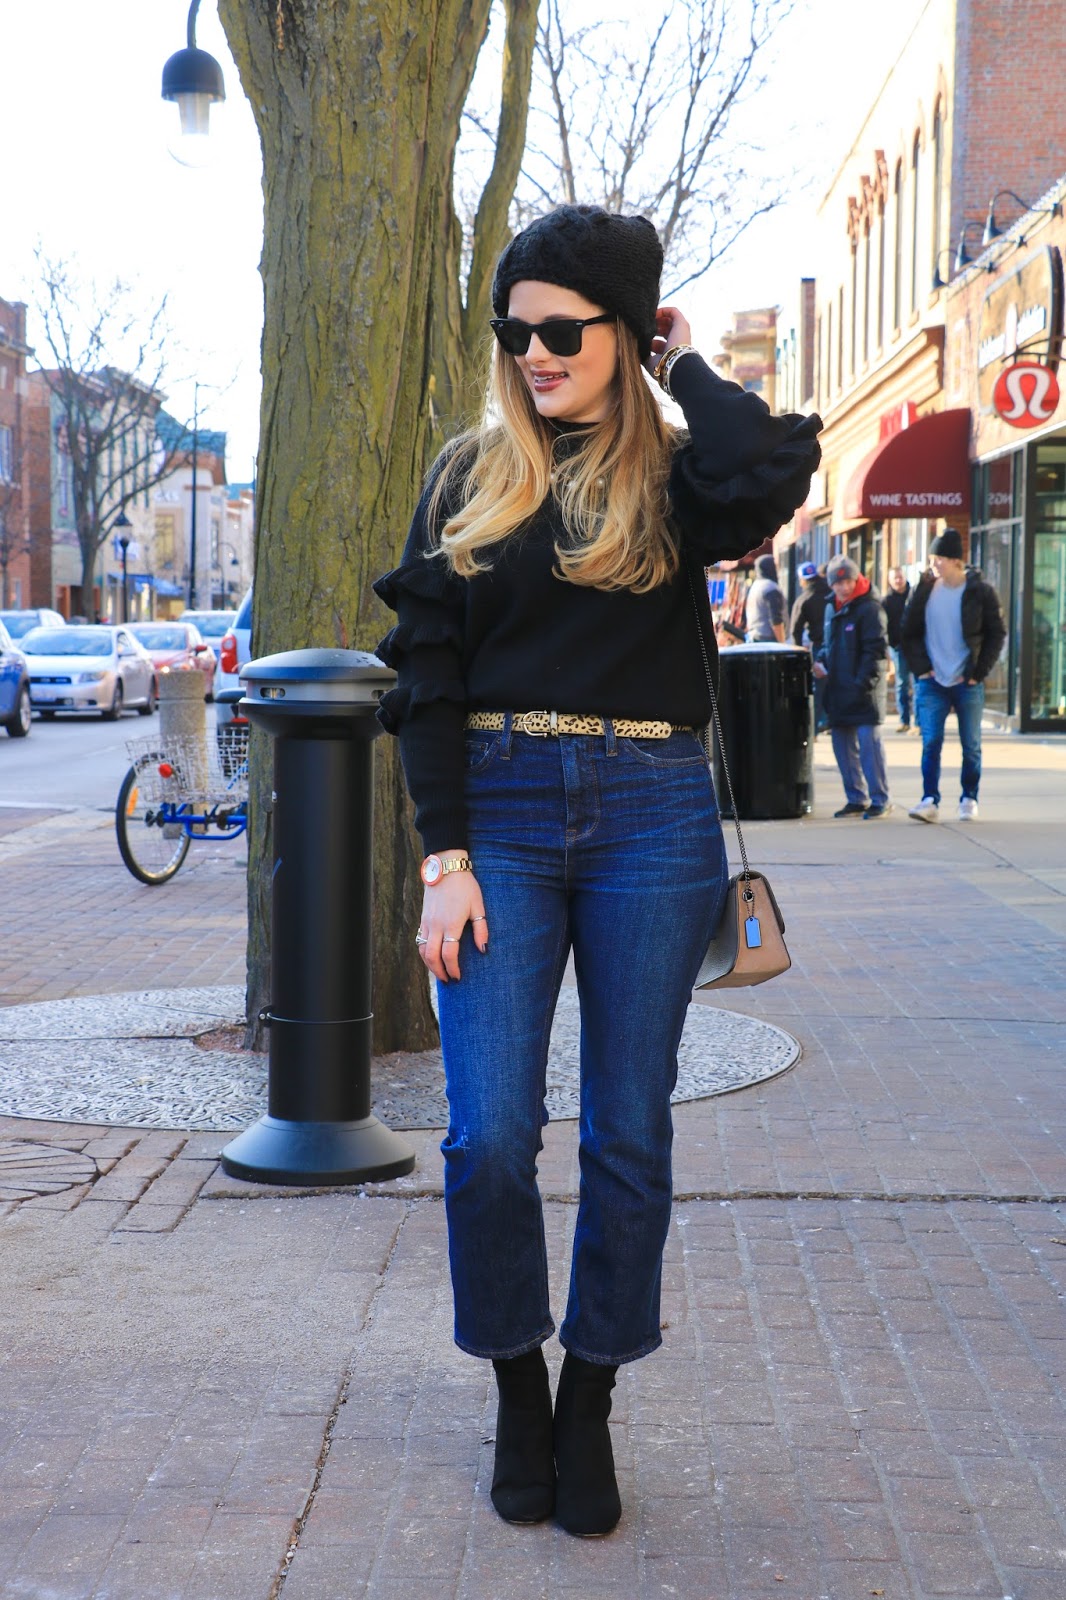 Nyc fashion blogger Kathleen Harper's winter outfit ideas